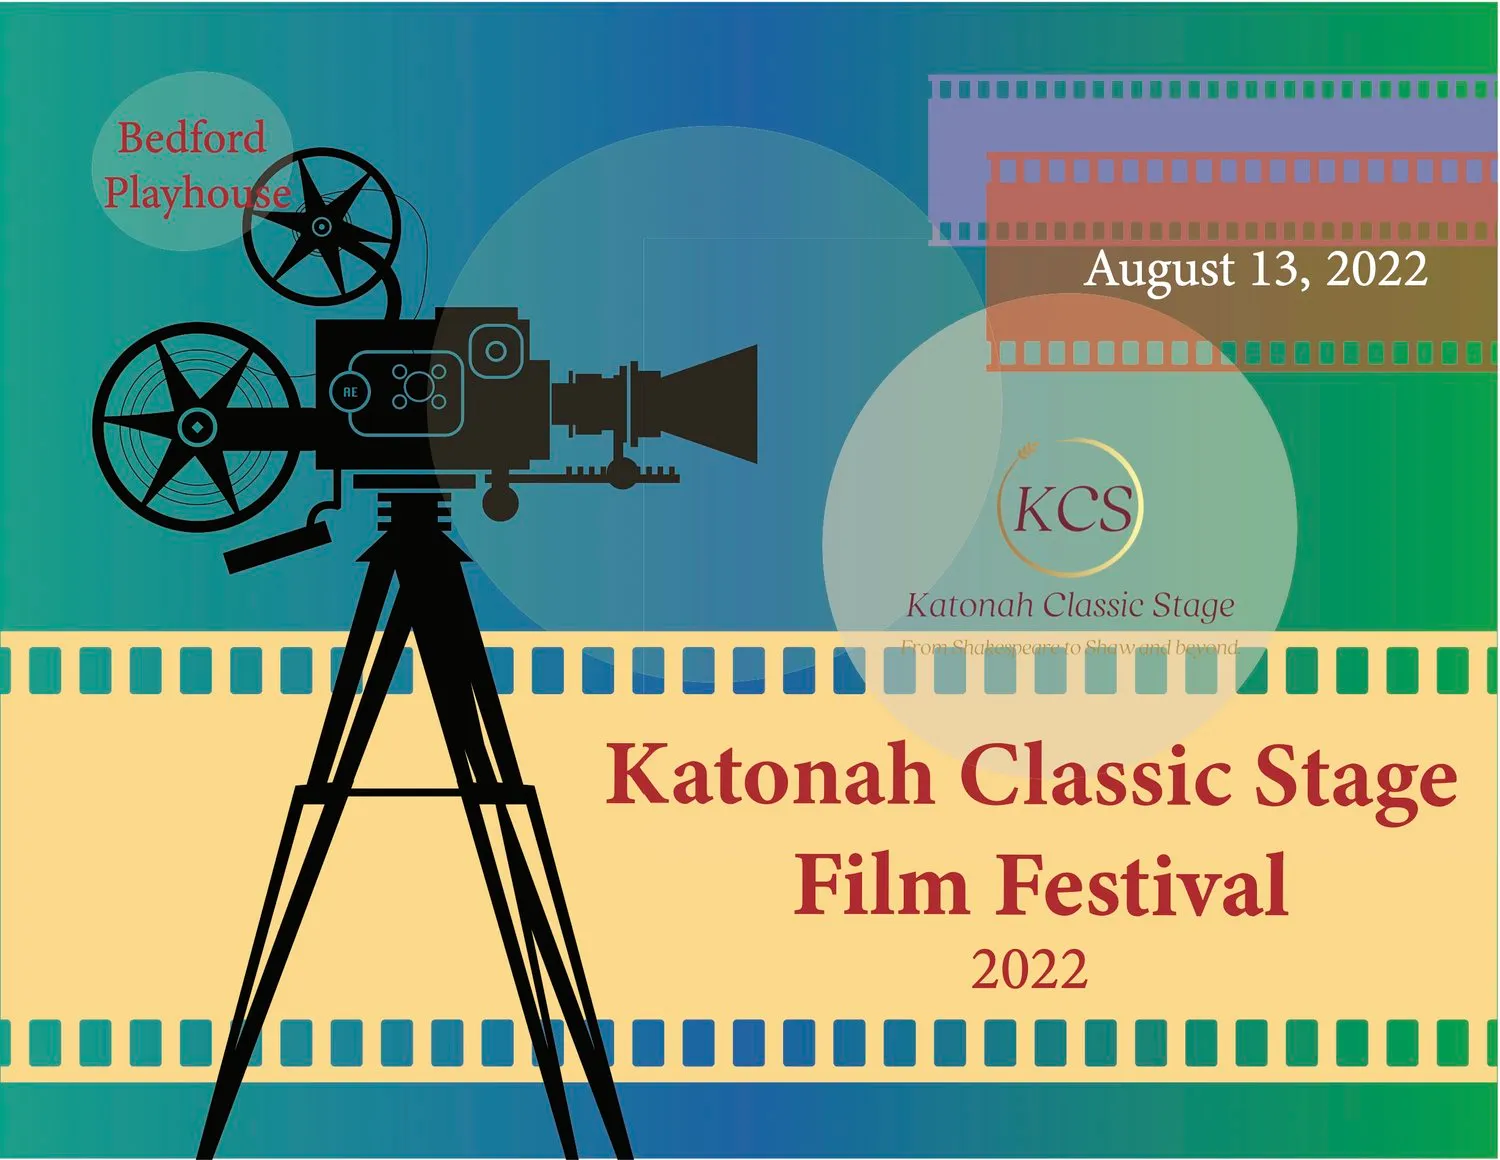 Summer on the Bedford Playhouse Lawn: Katonah Classic Stage Film Festival